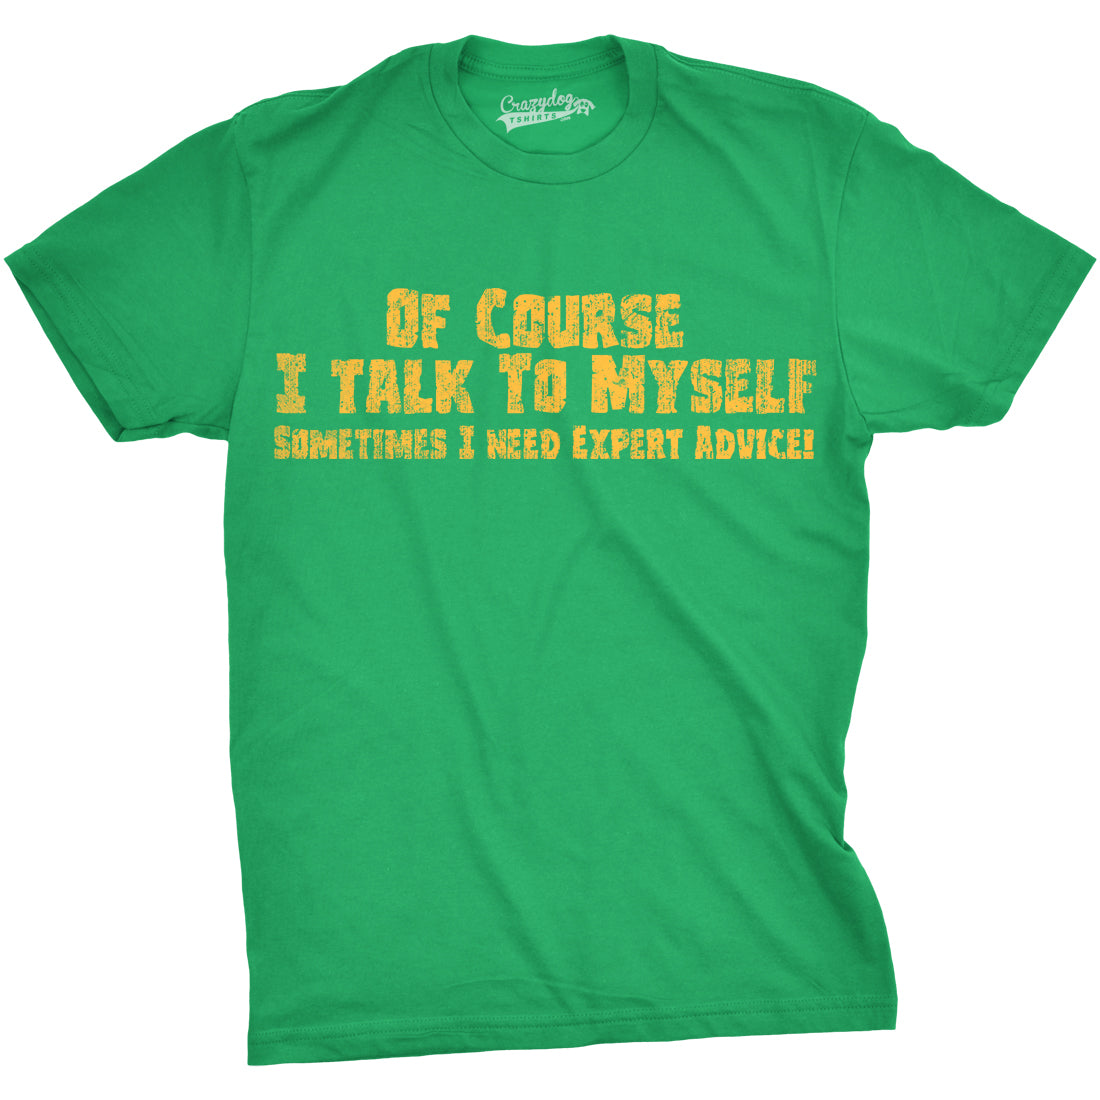 Funny Green Of Course I Talk To Myself, I Need Expert Advice Mens T Shirt Nerdy Sarcastic Tee